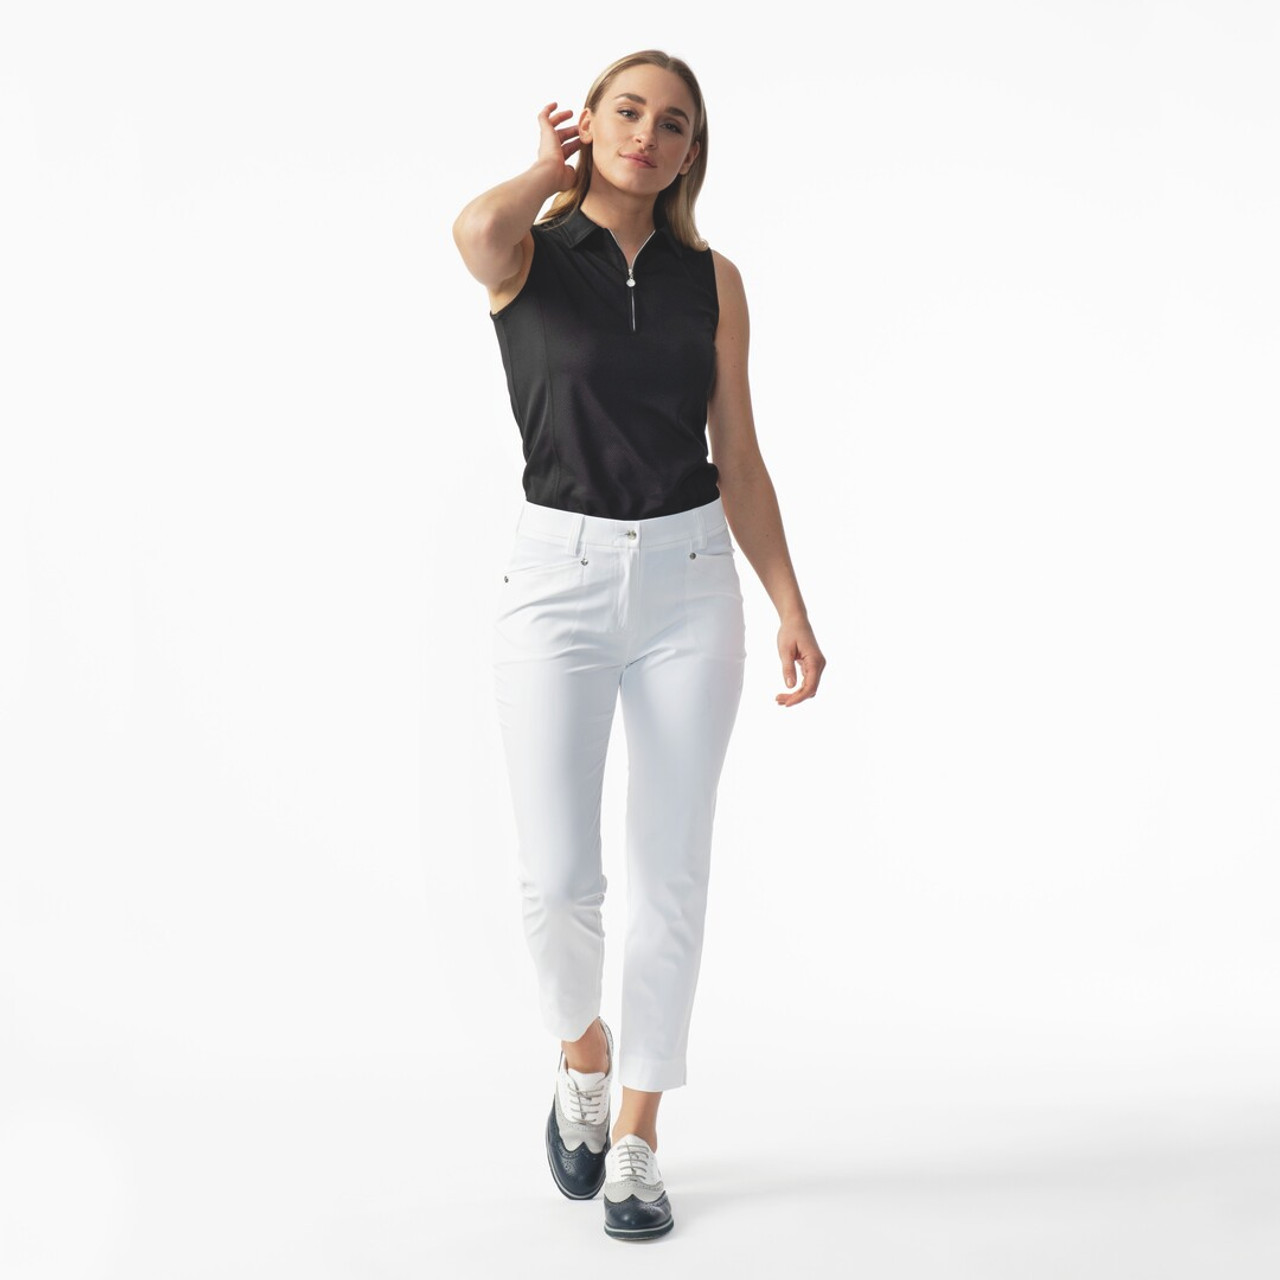 Daily Sports Ladies Magic High Water 37 Outseam Pull On Golf Pants -  ESSENTIAL DAILY White